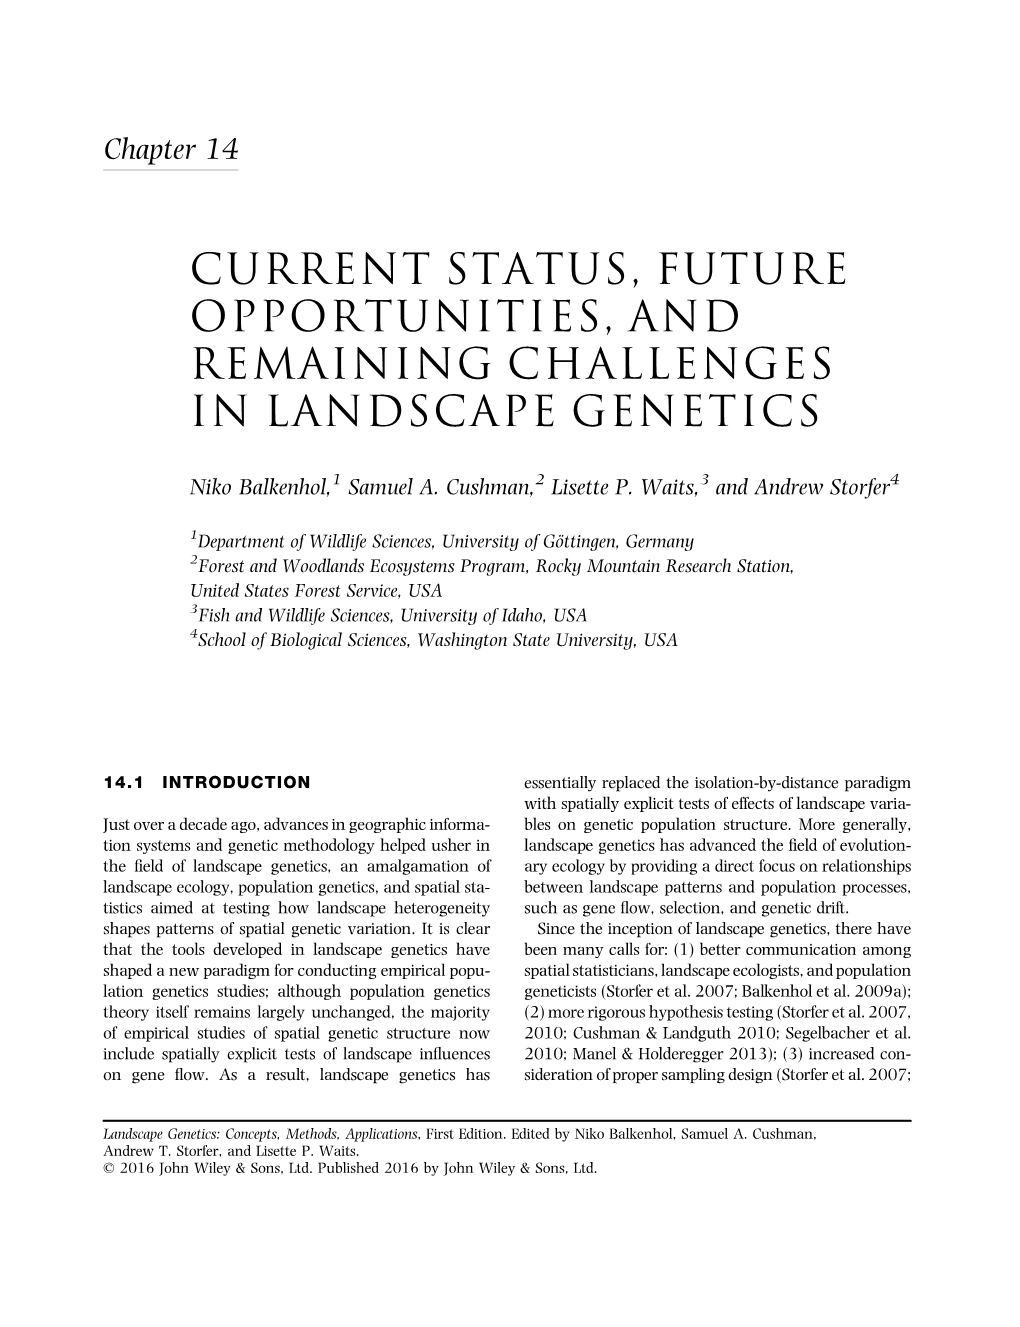 Current Status, Future Opportunities, and Remaining Challenges in Landscape Genetics